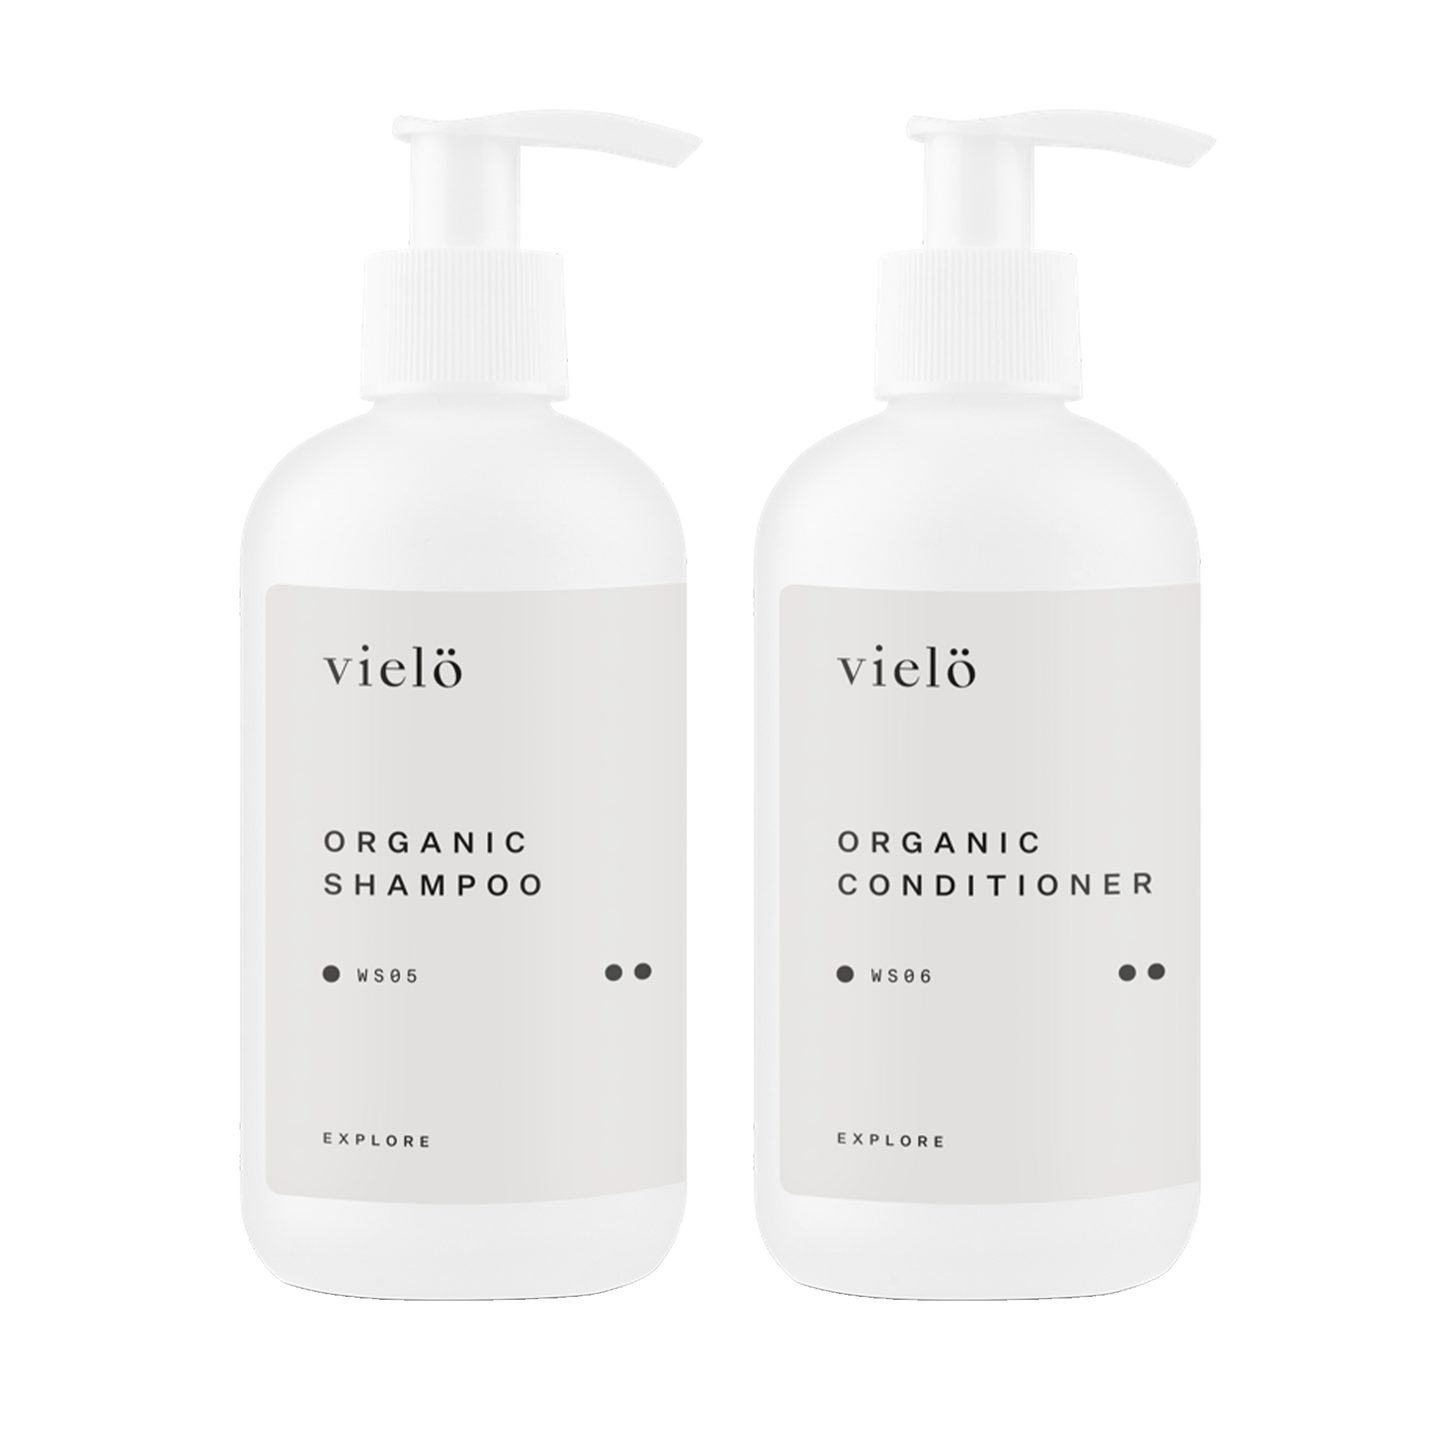 Vielo Organic Duo Hair: Nourishing Organic Duo to cleanse, strengthen and moisturize damaged hair and sensitive scalps gently, leaving hair soft and smooth. Suitable for all hair types.